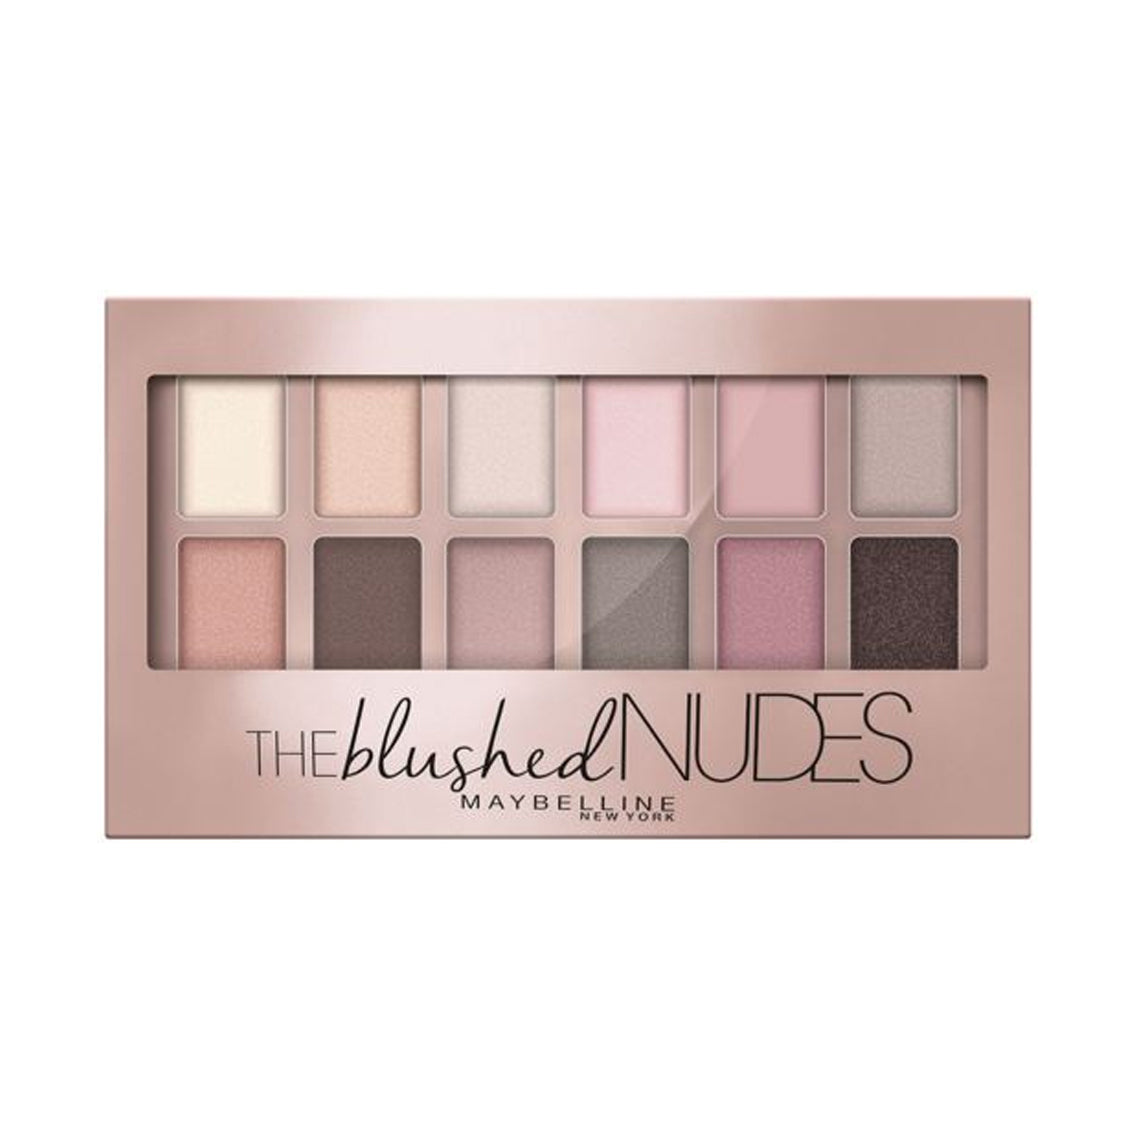 Maybelline Shadow Palette Blushed Nudes